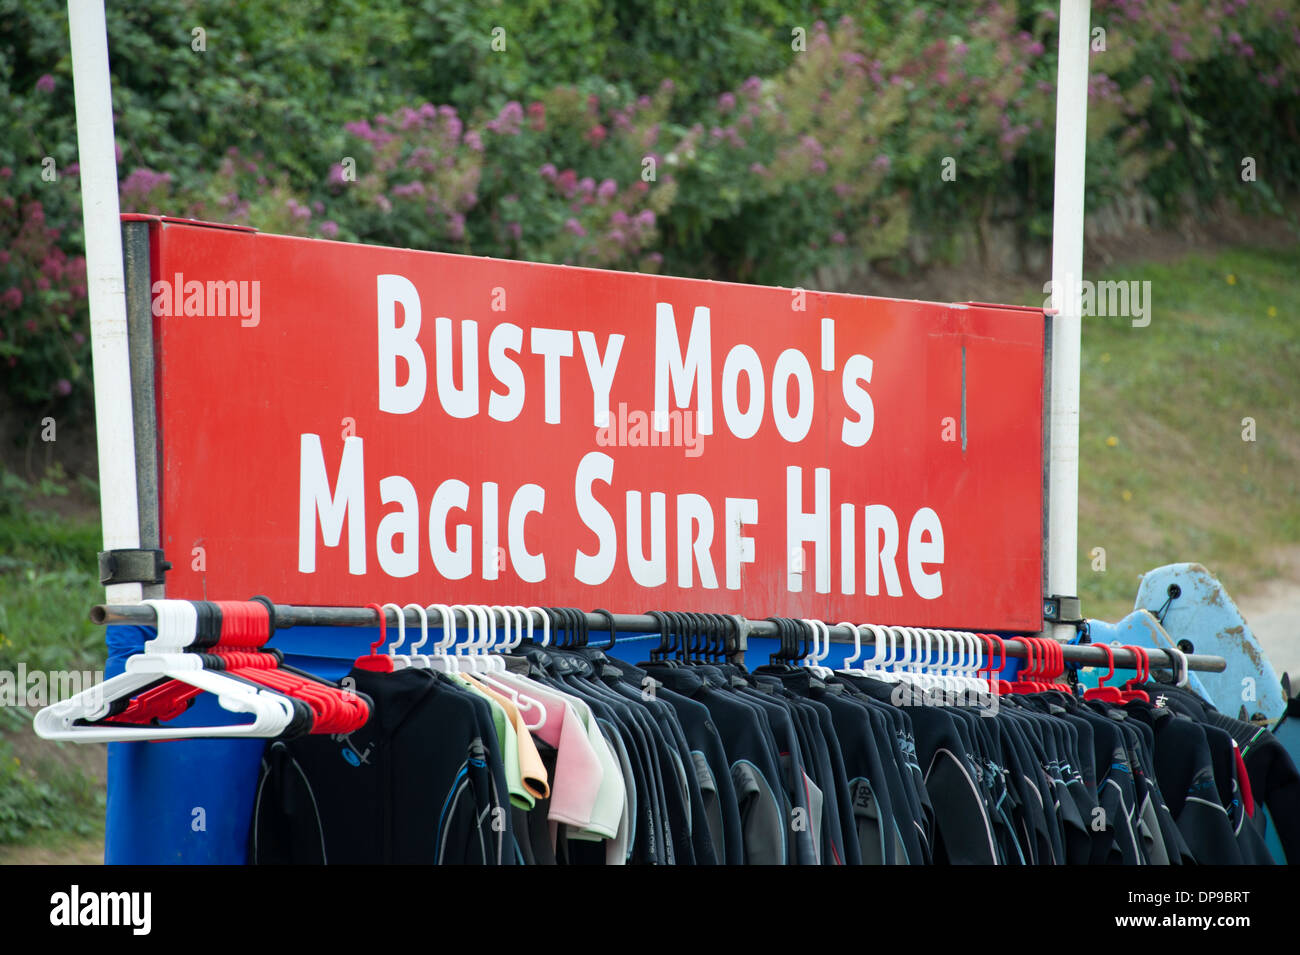 Busty Moo's Moos Magic Surf Hire Funny Sign Stock Photo